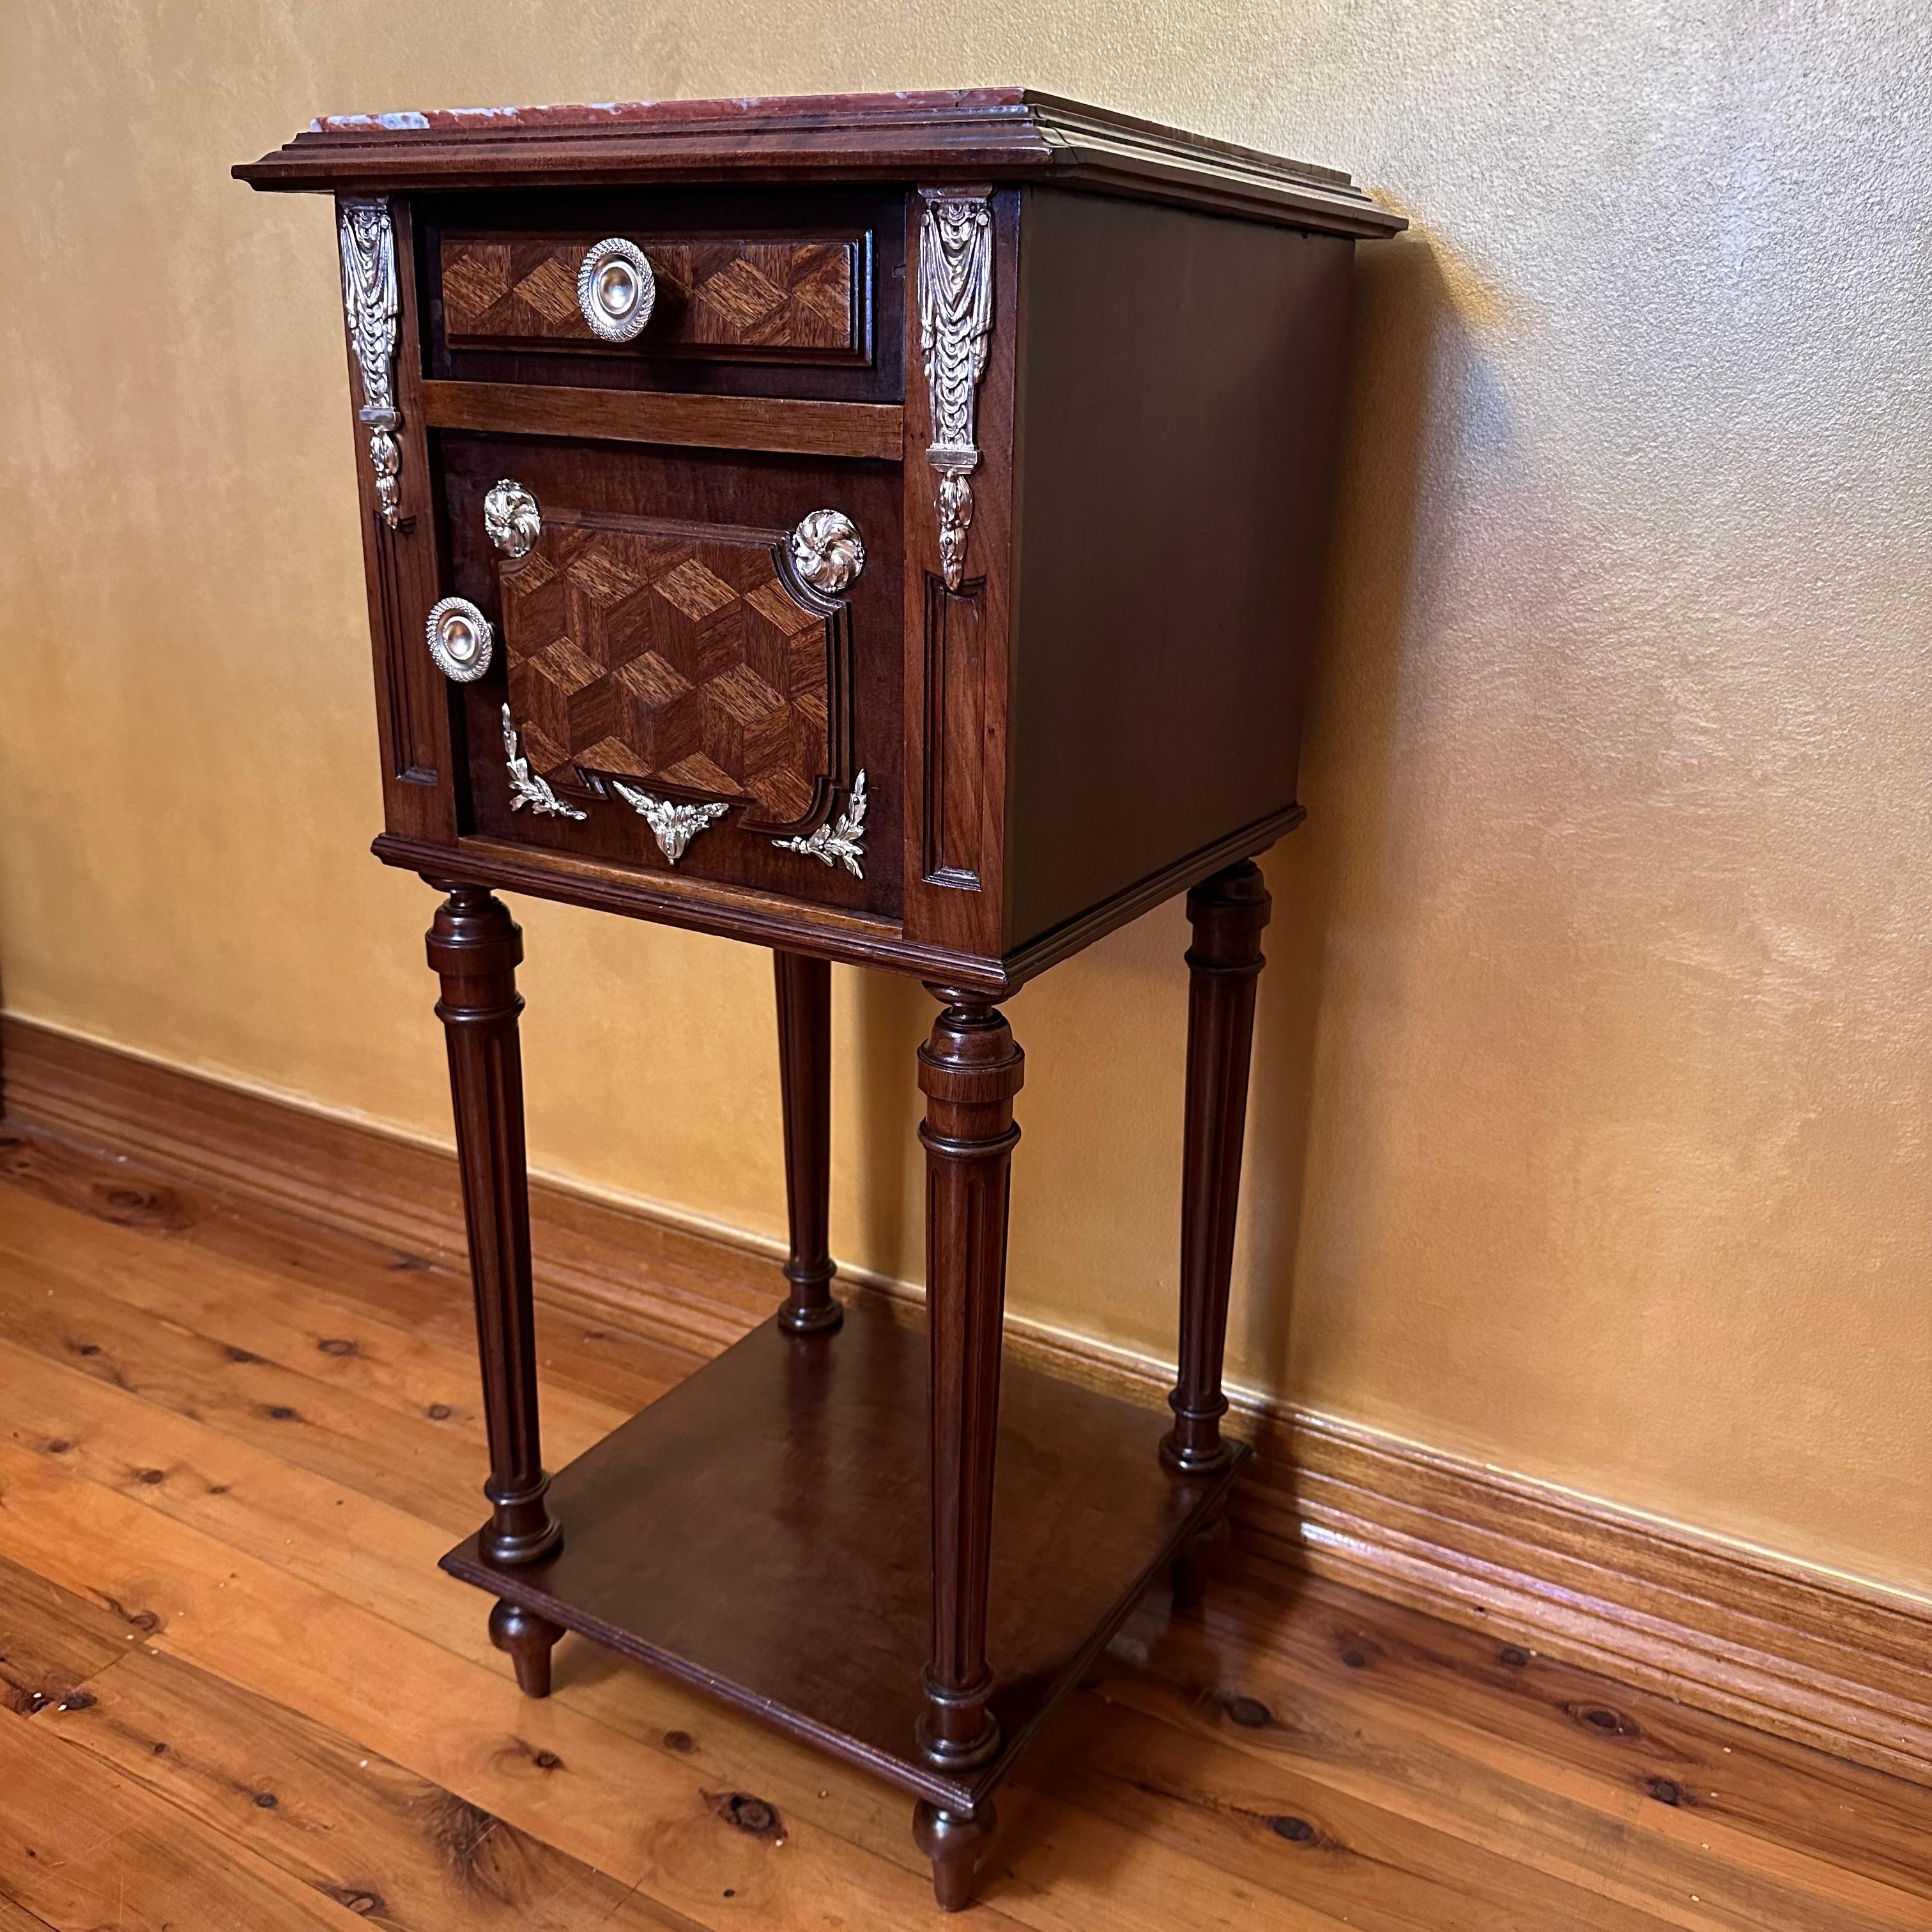 Marble top insert, pattern design burr front, brass detail that has been polished to look like new, shelf on bottom, has been French Polished 

Circa: 19th Century 

Material: Walnut, Marble & Brass

Country Of Origin: France 

Measurements: 88cm